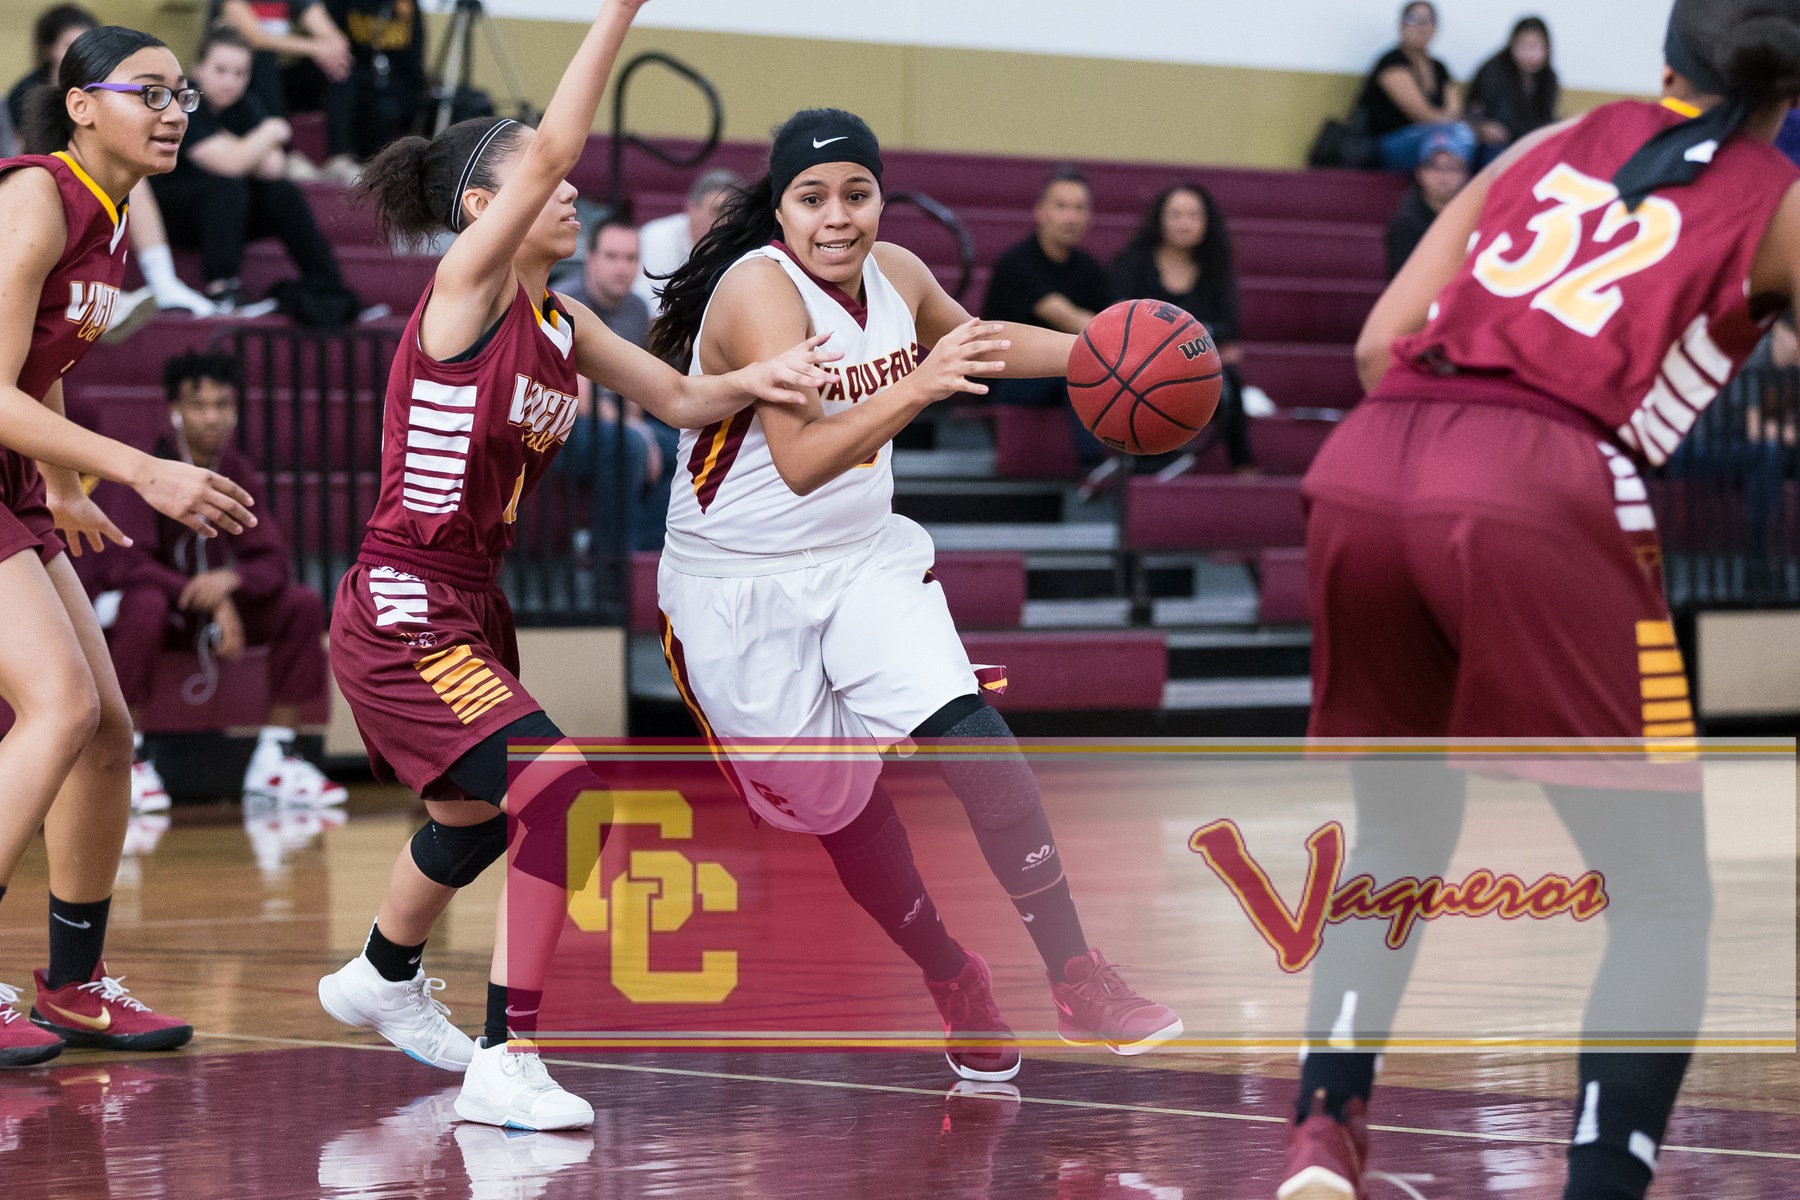 Glendale opens conference play with resounding victory over Victor Valley, 71-32 Jan. 13